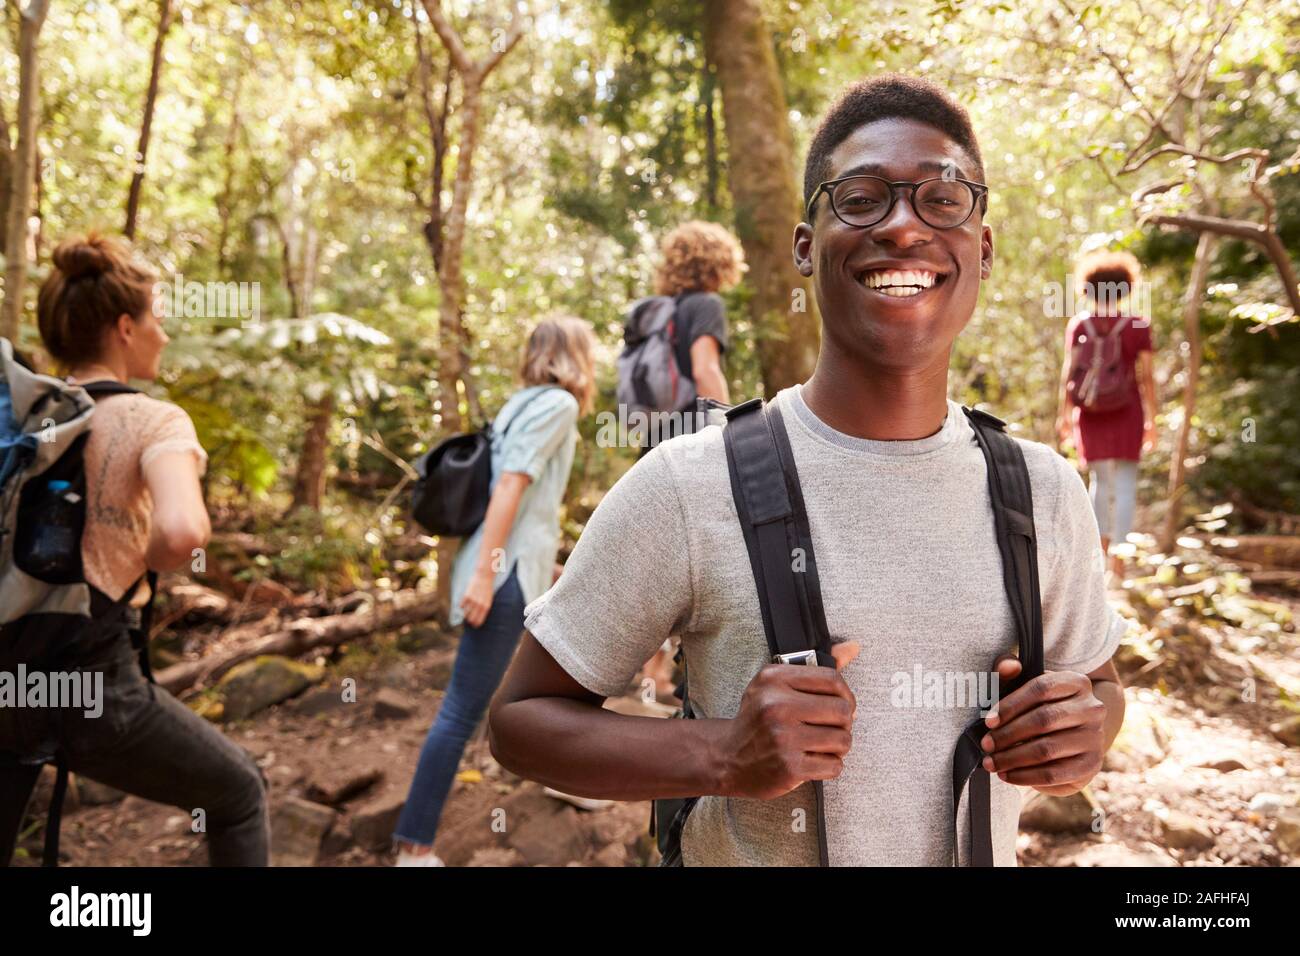 Waist up portrait of smiling millennial African American man hiking in a forest with friends, close up Stock Photo